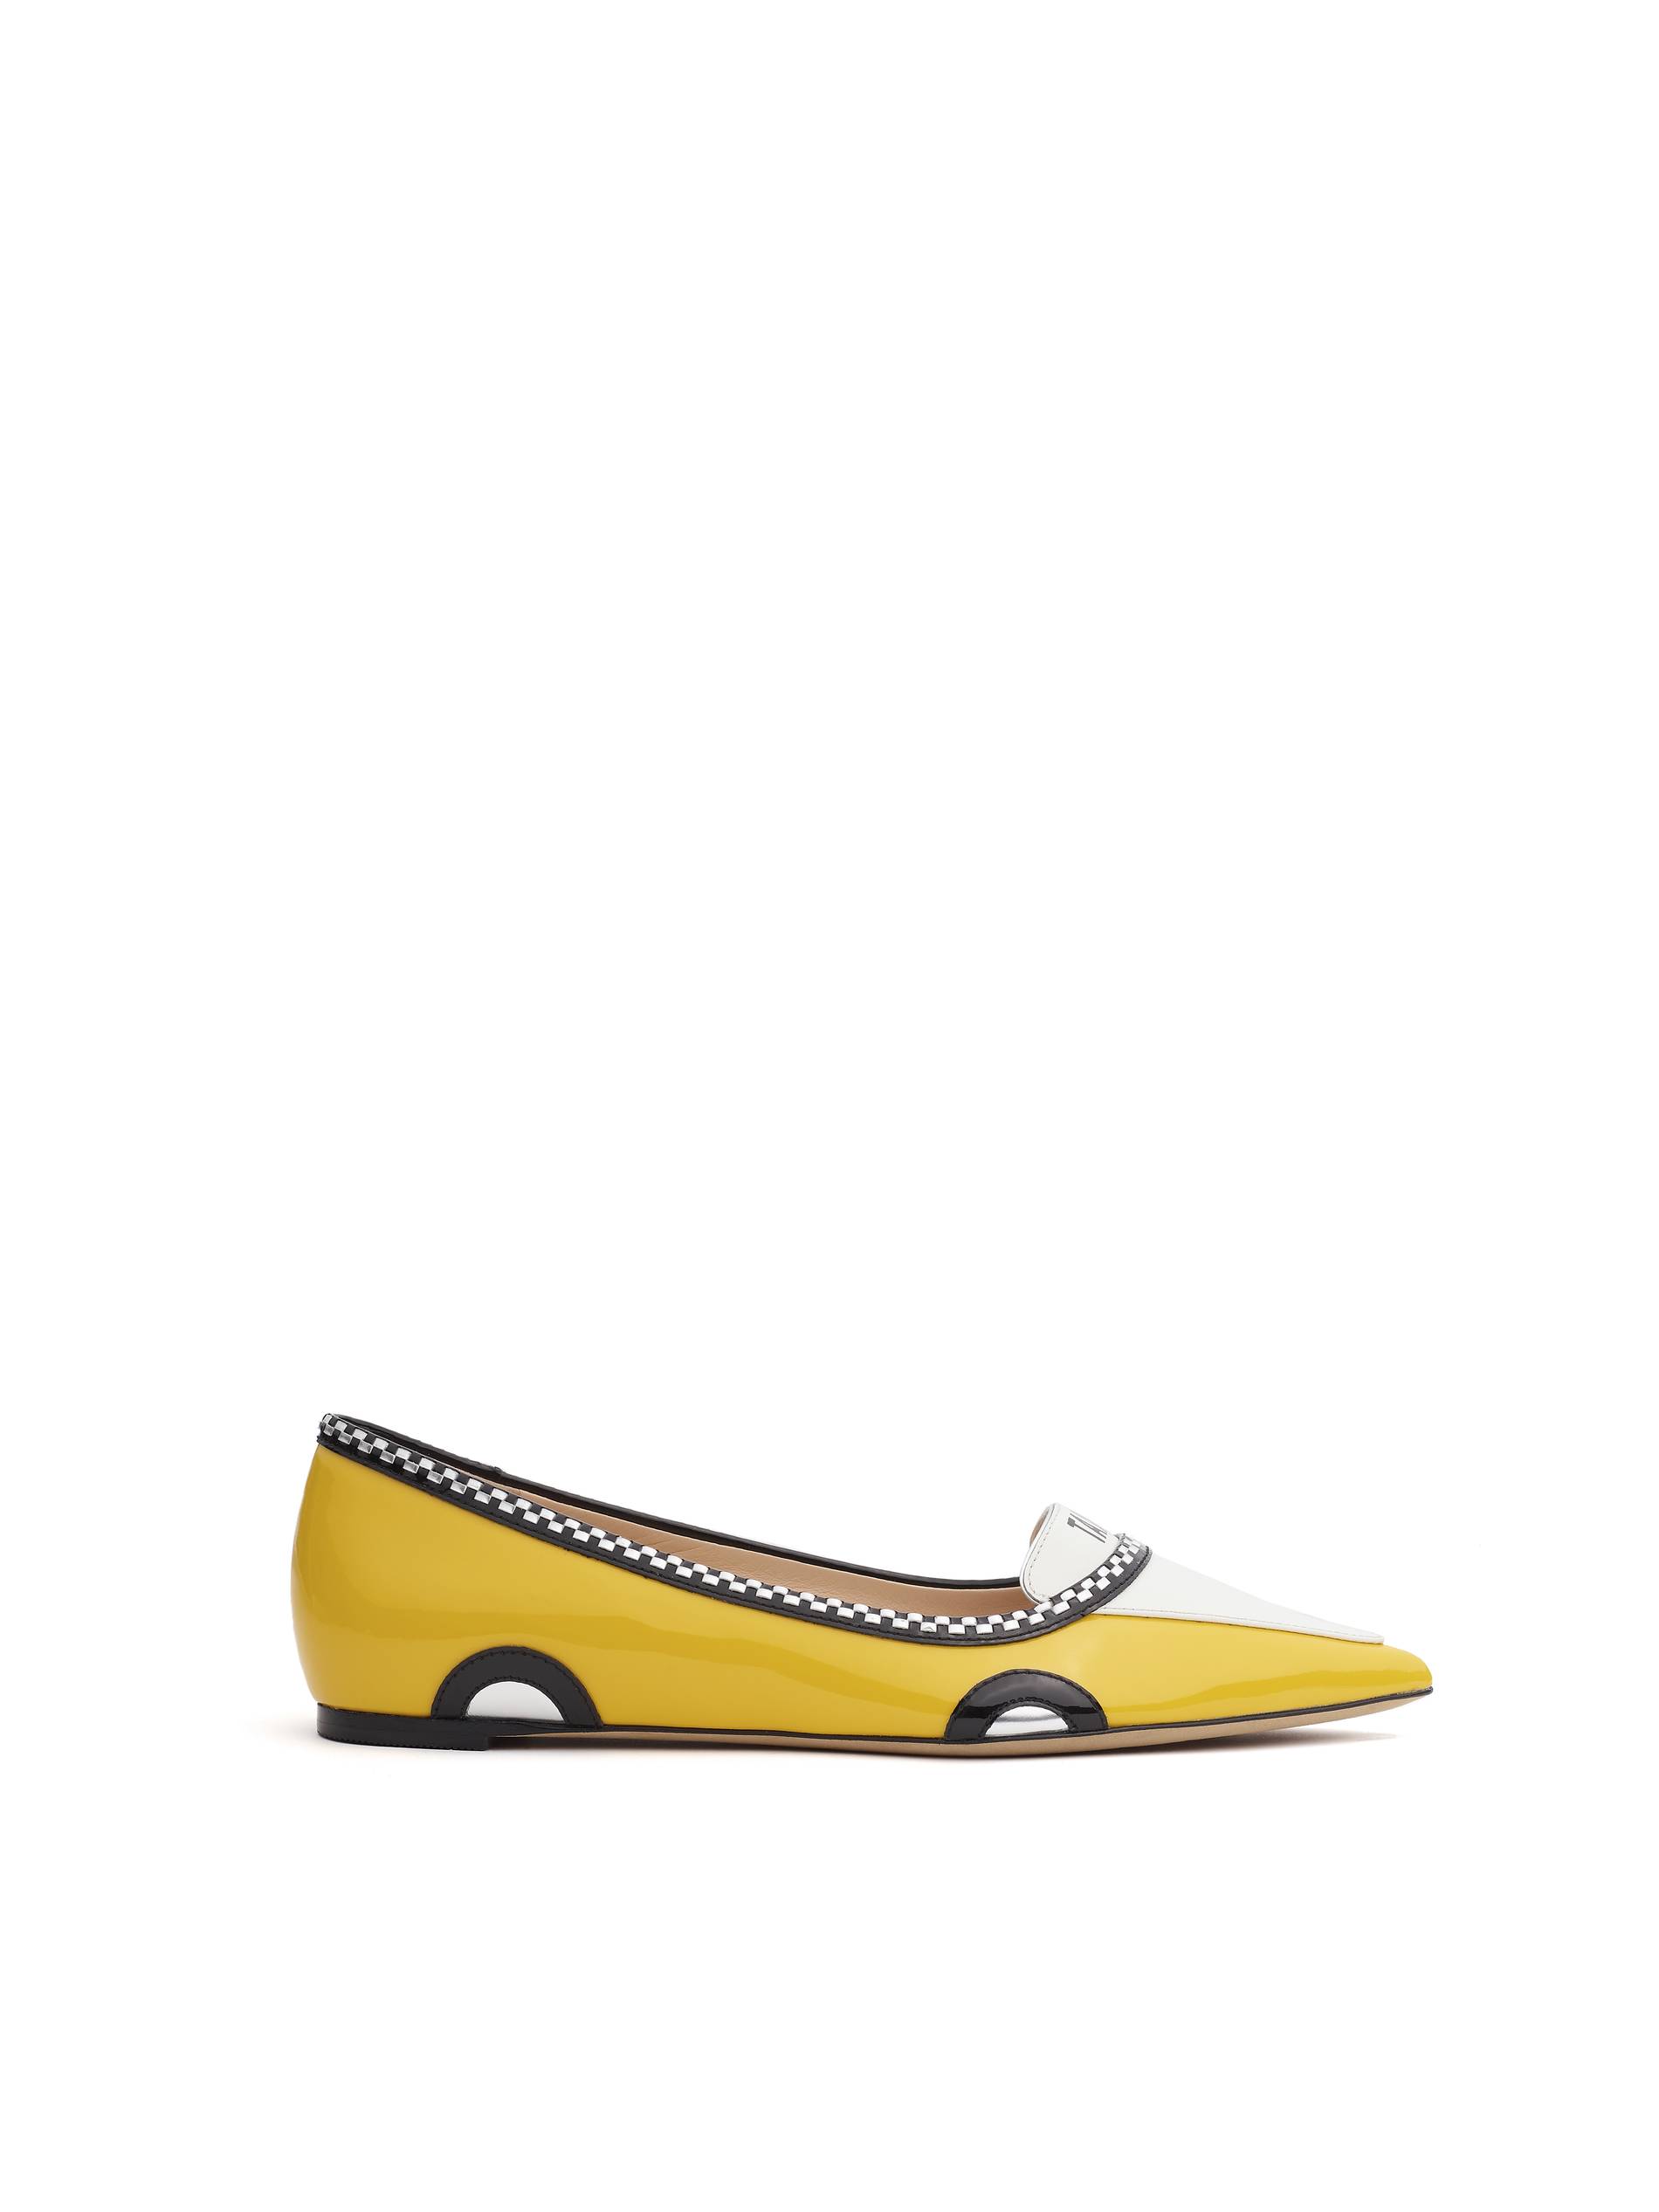 Kate Spade New York gogo taxi flat in high noon multi